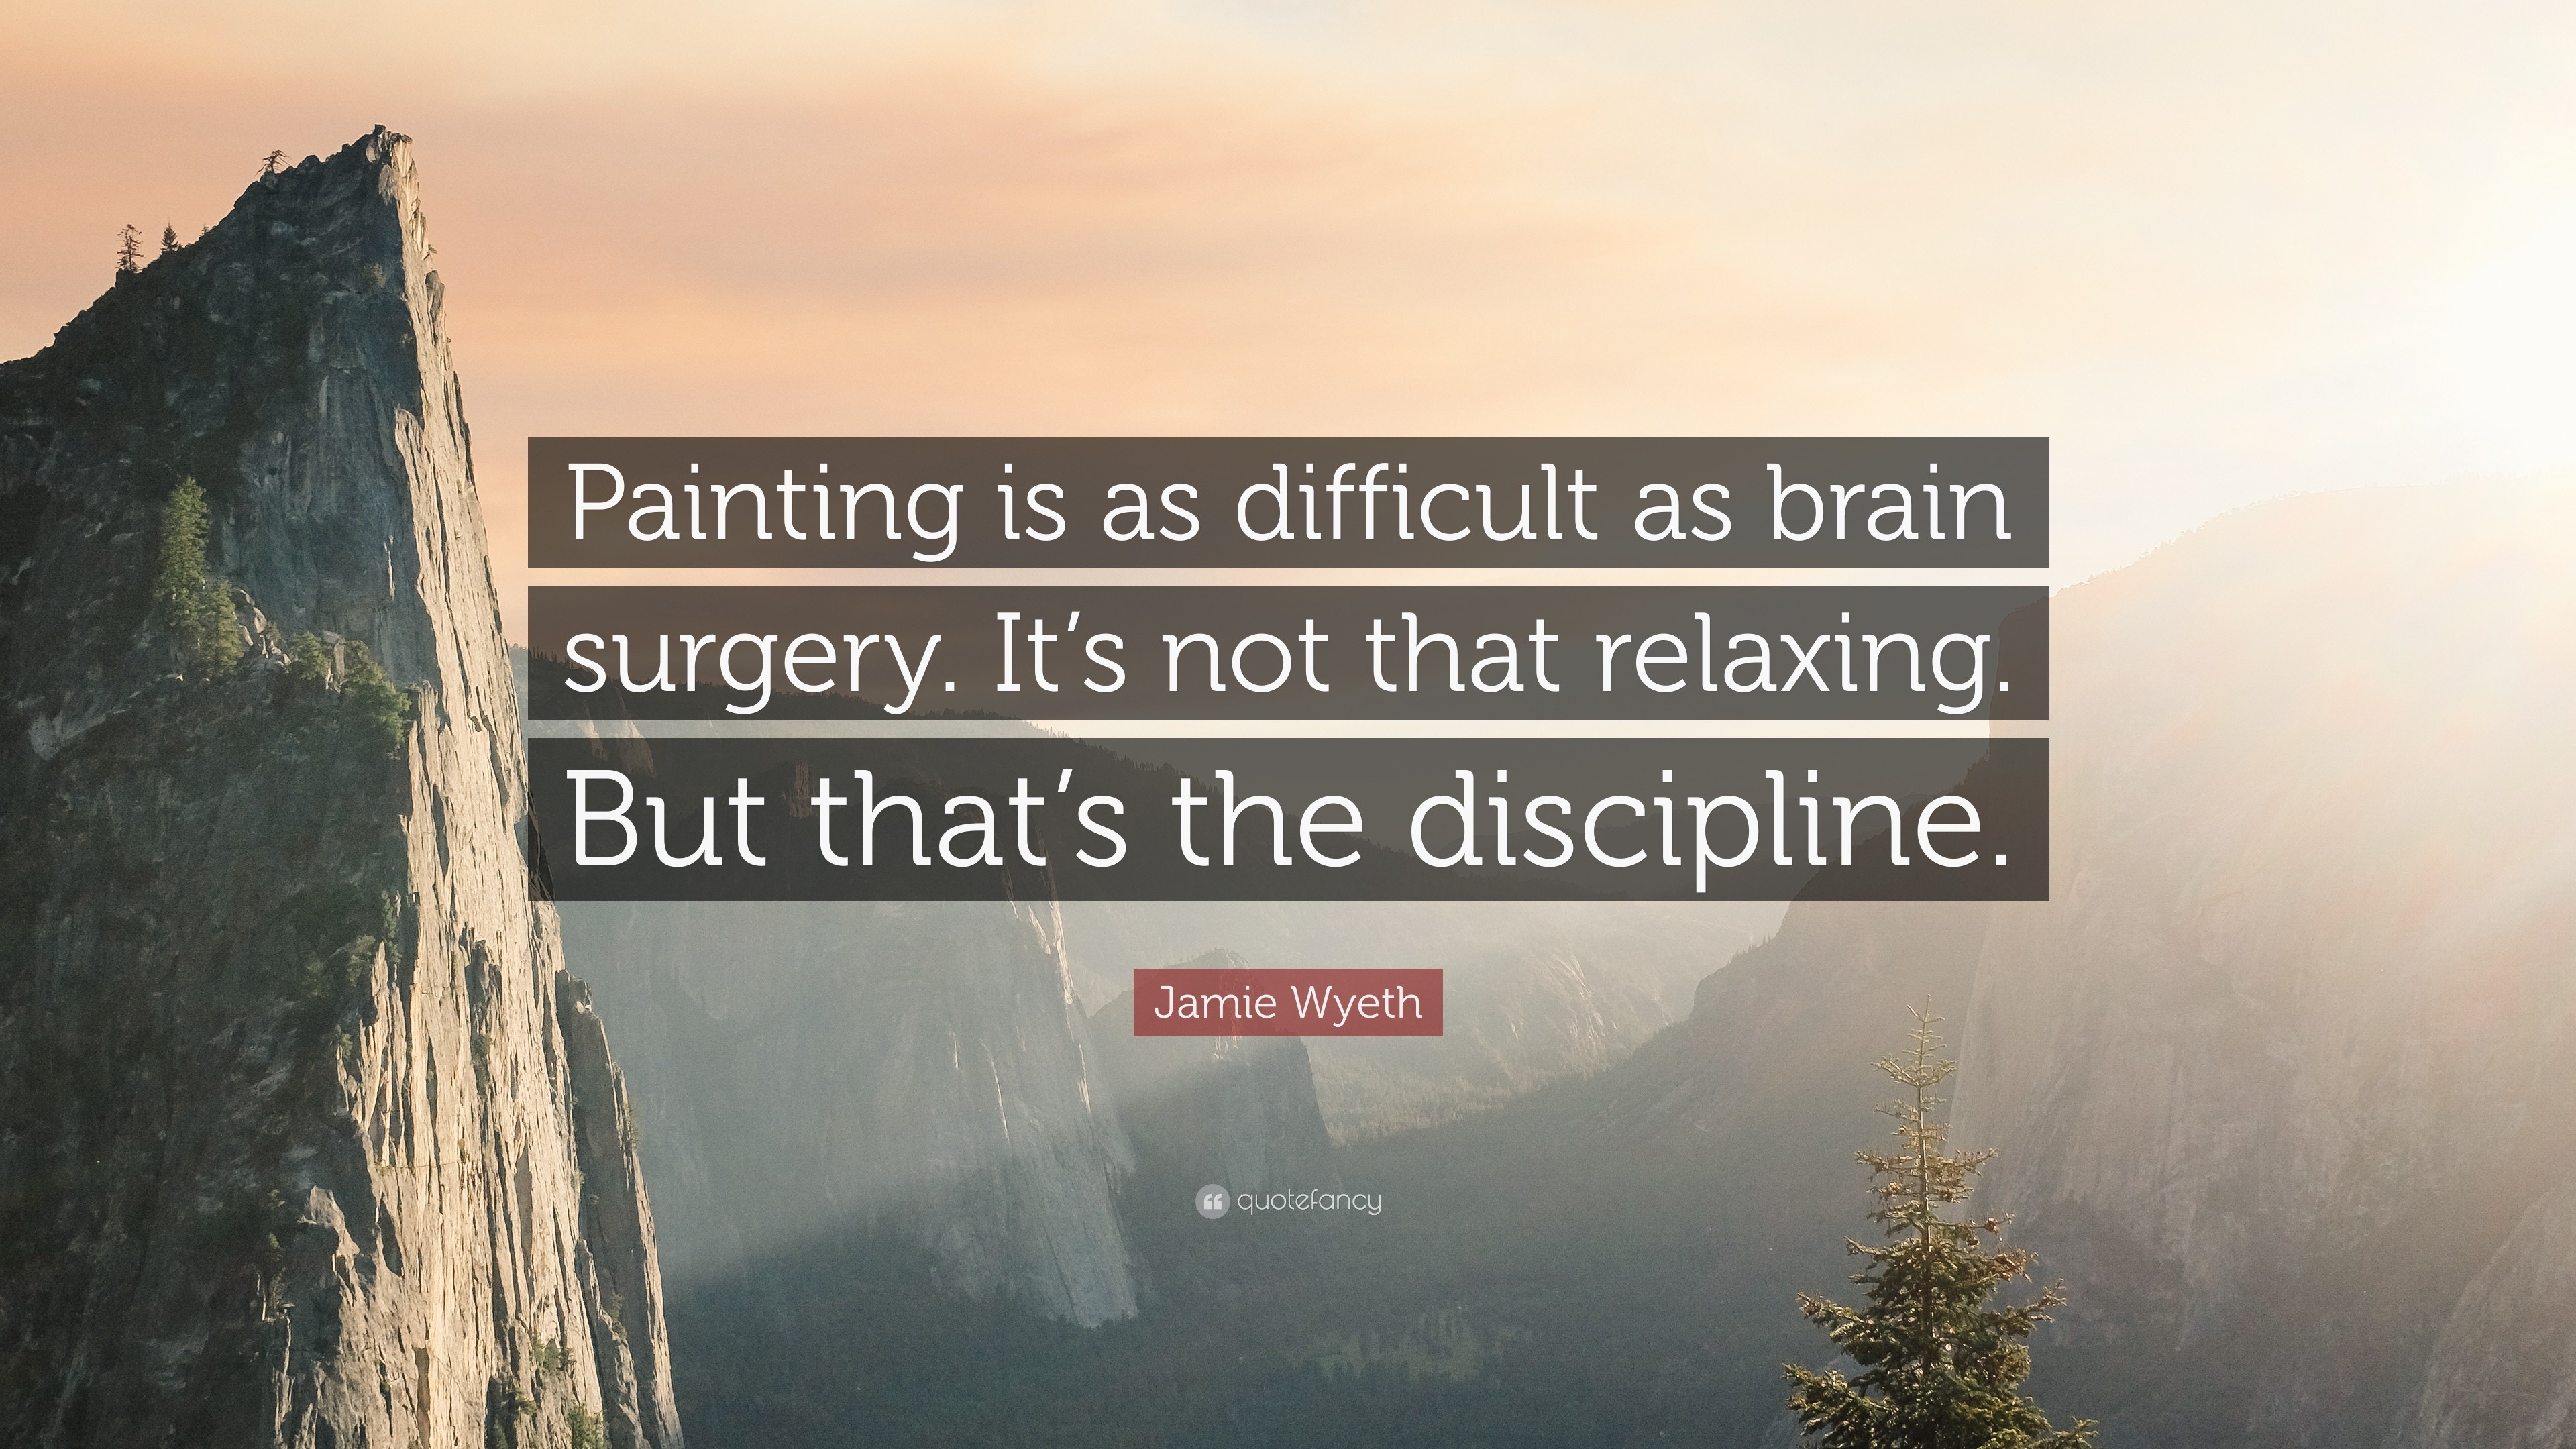 Quotes About Painting - Painting Inspired